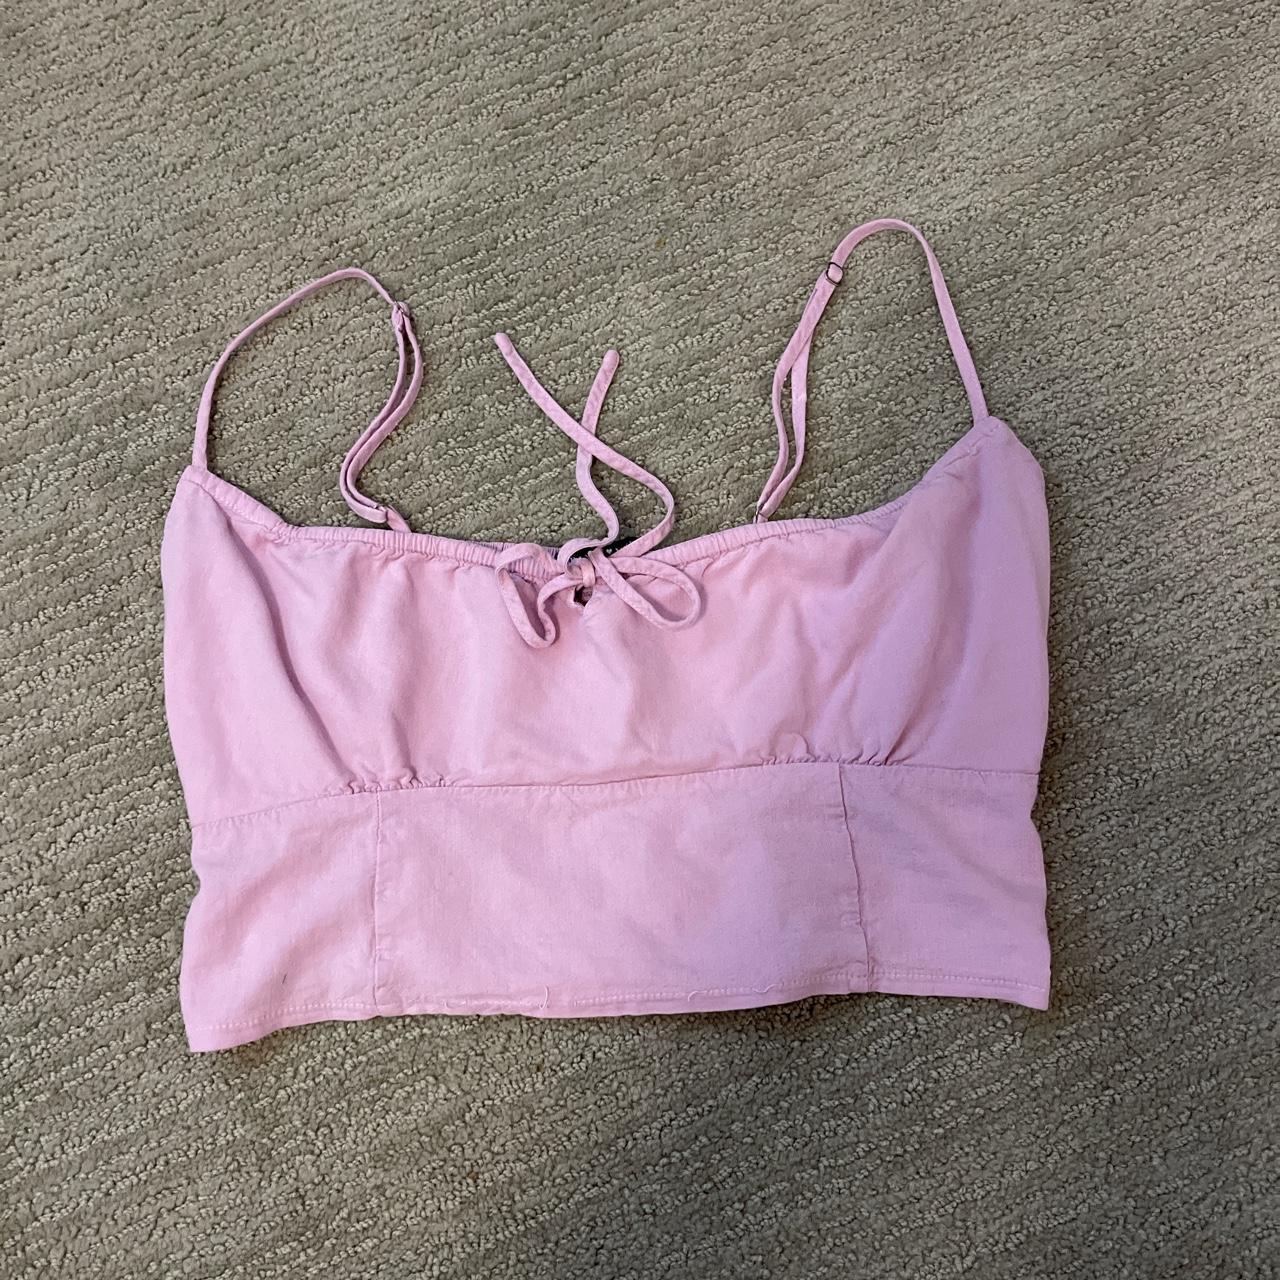 Brandy Melville Women's Purple and Pink Vests-tanks-camis